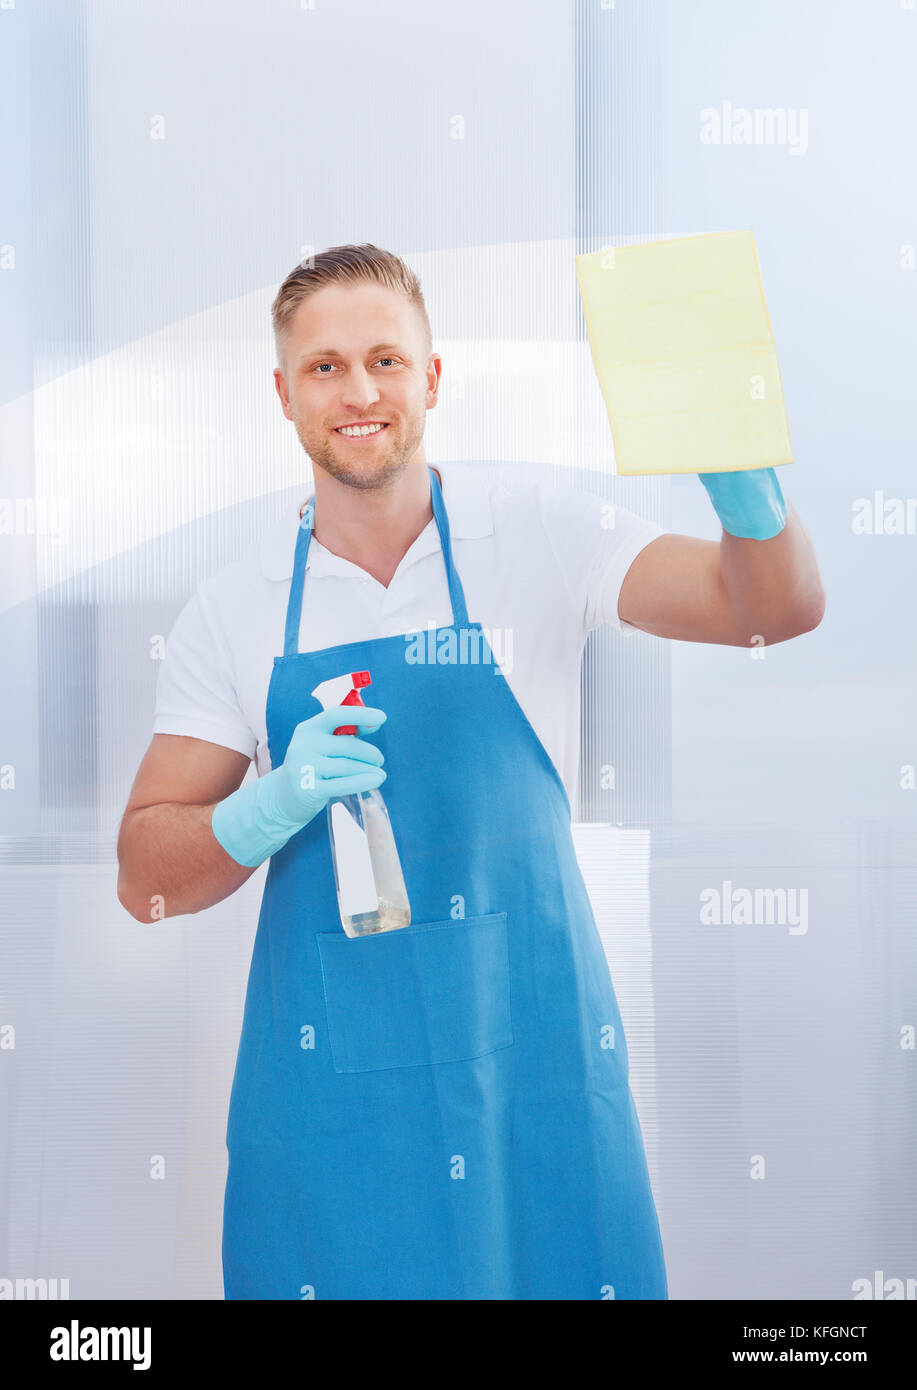 Friendly smiling male cleaner cleaning a pane of glass with a spray bottle and cloth in an office building Stock Photo